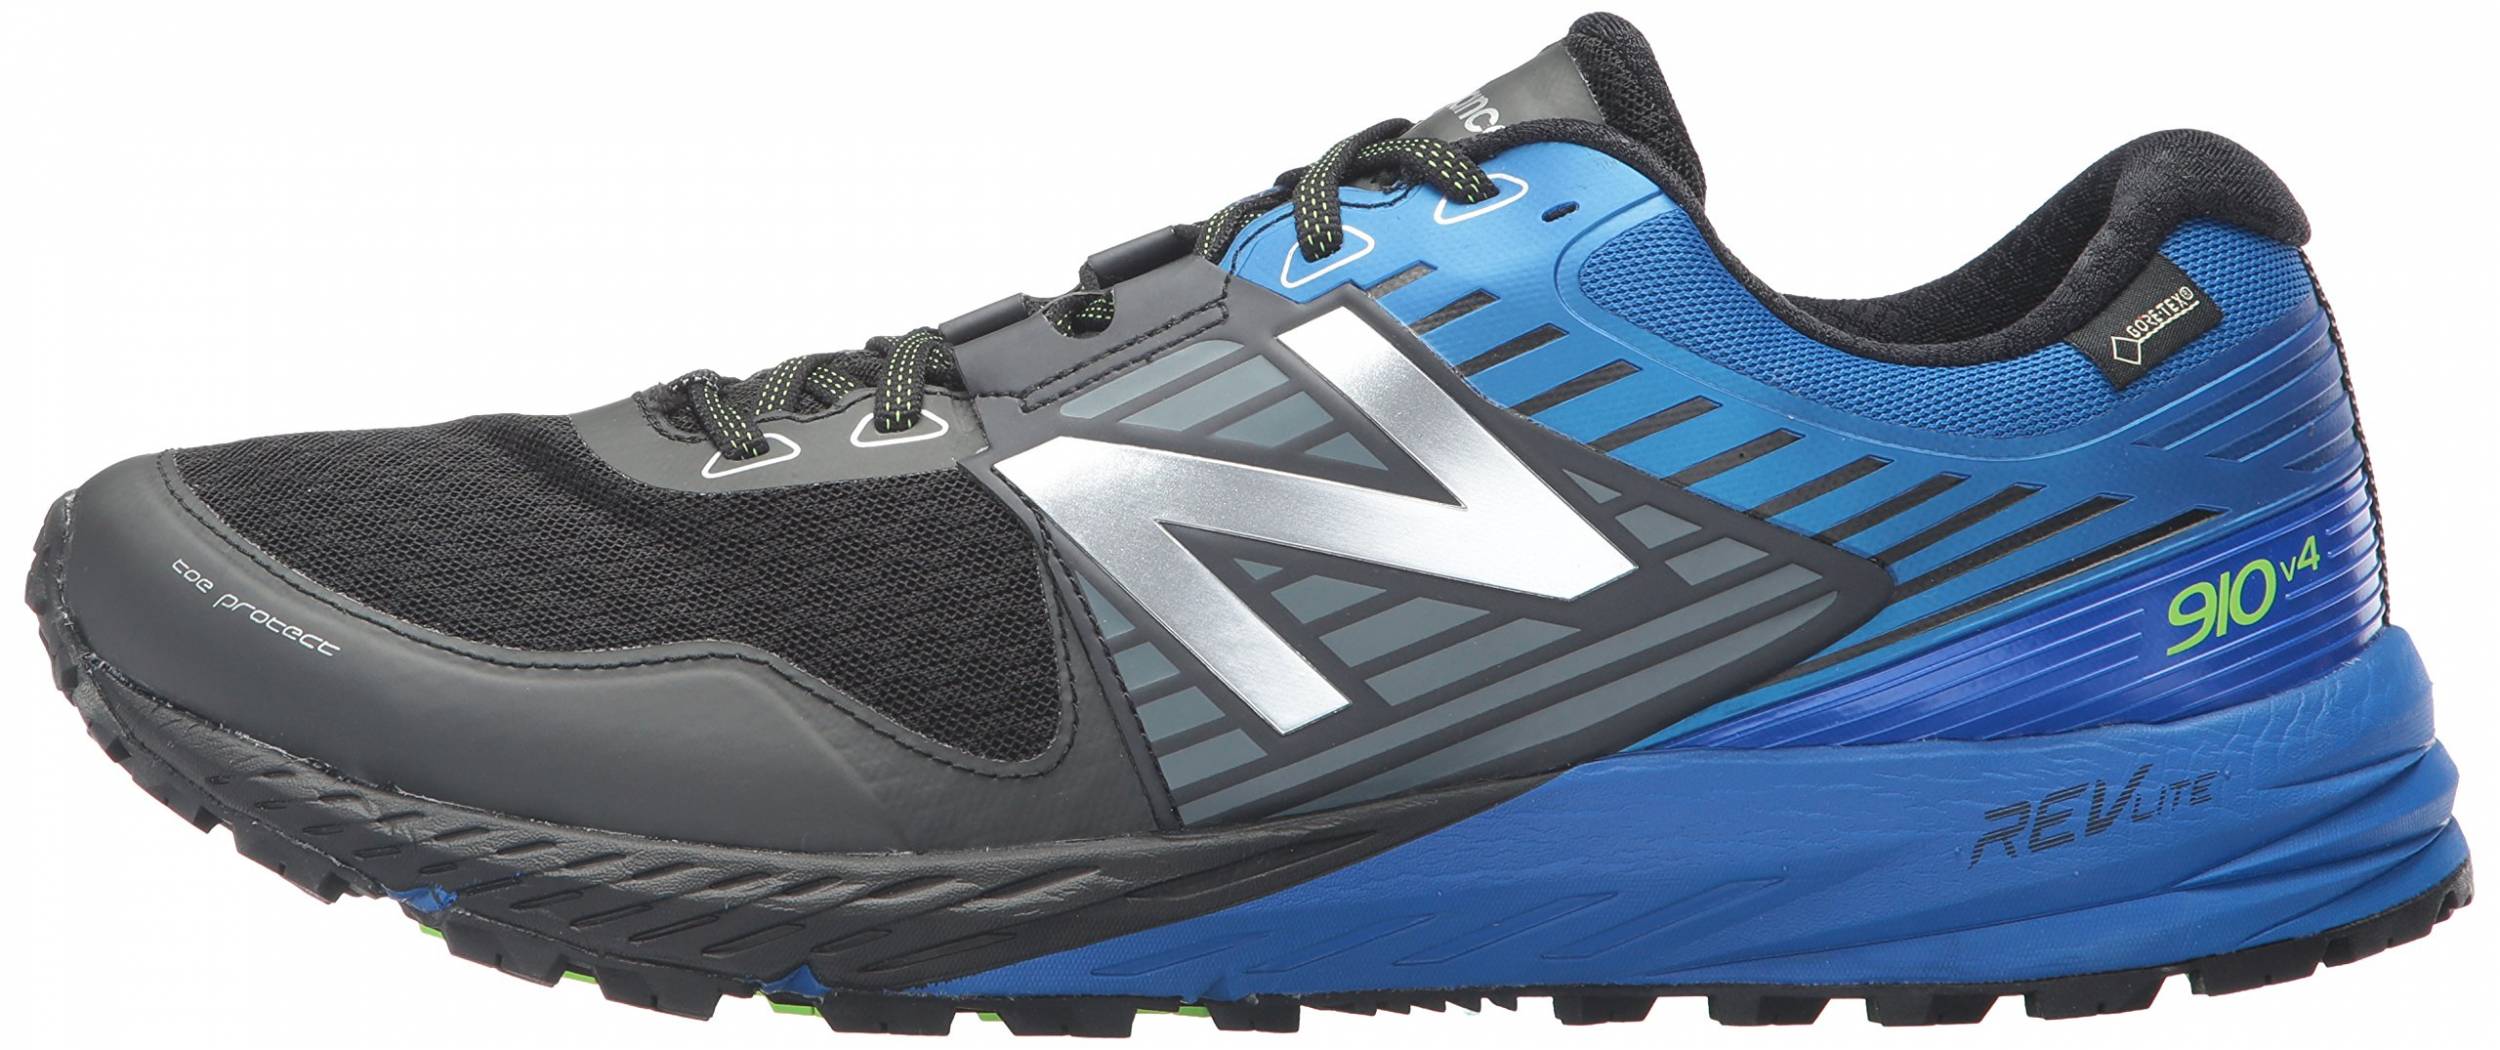 New Balance Men's 910v4 Online Hotsell, UP TO 65% OFF